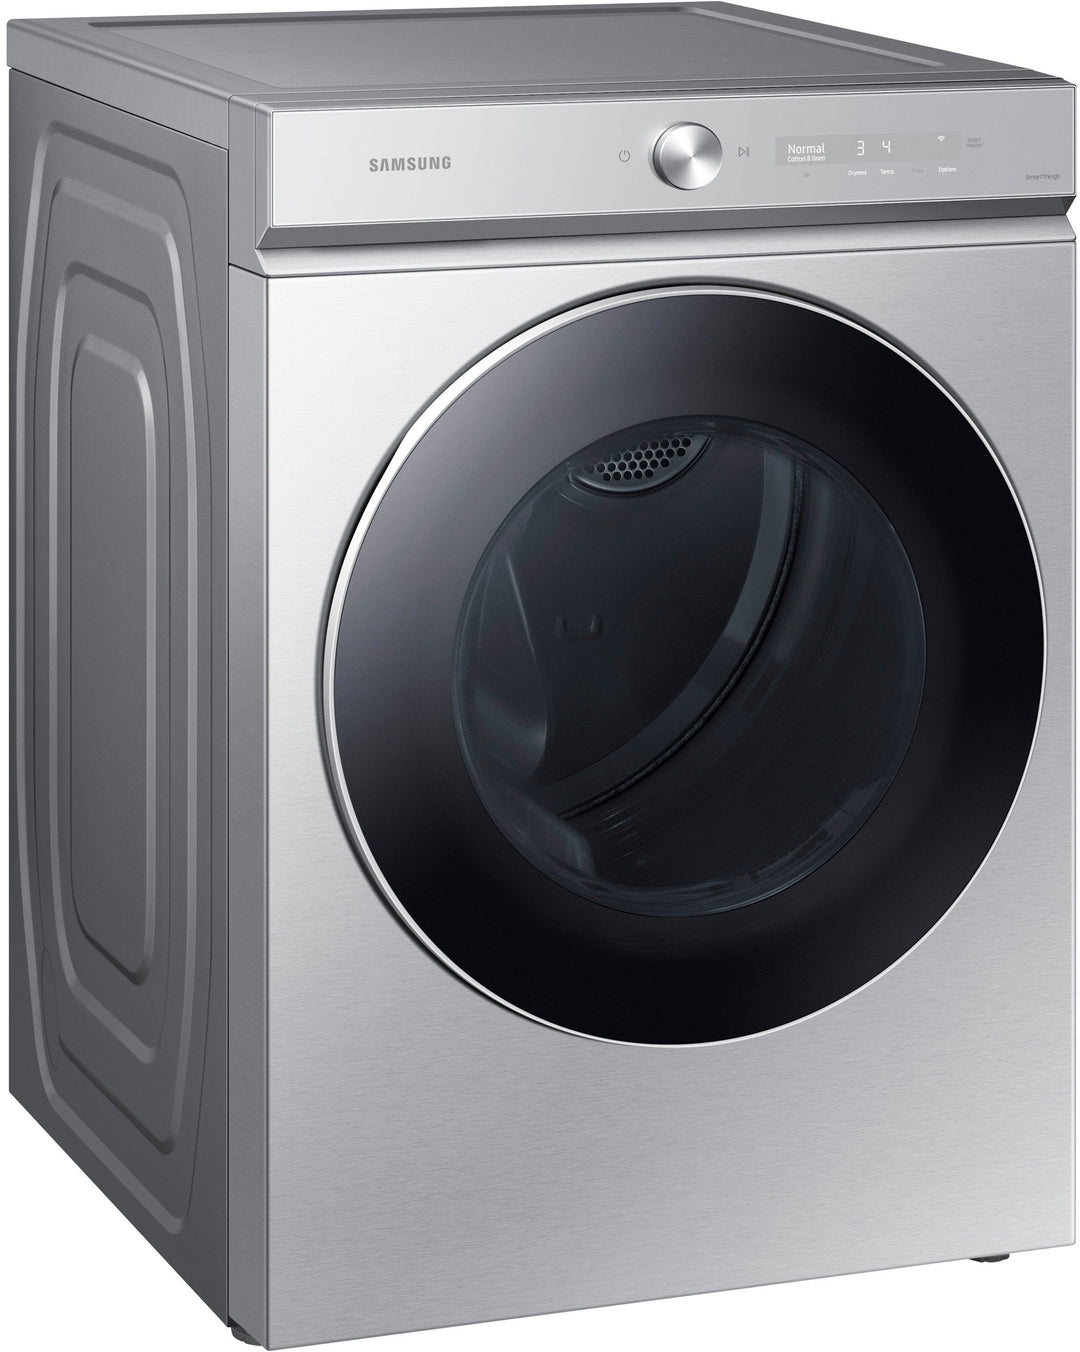 Samsung - Bespoke 7.6 cu. ft. Ultra Capacity Gas Dryer with AI Optimal Dry and Super Speed Dry - Silver steel_3